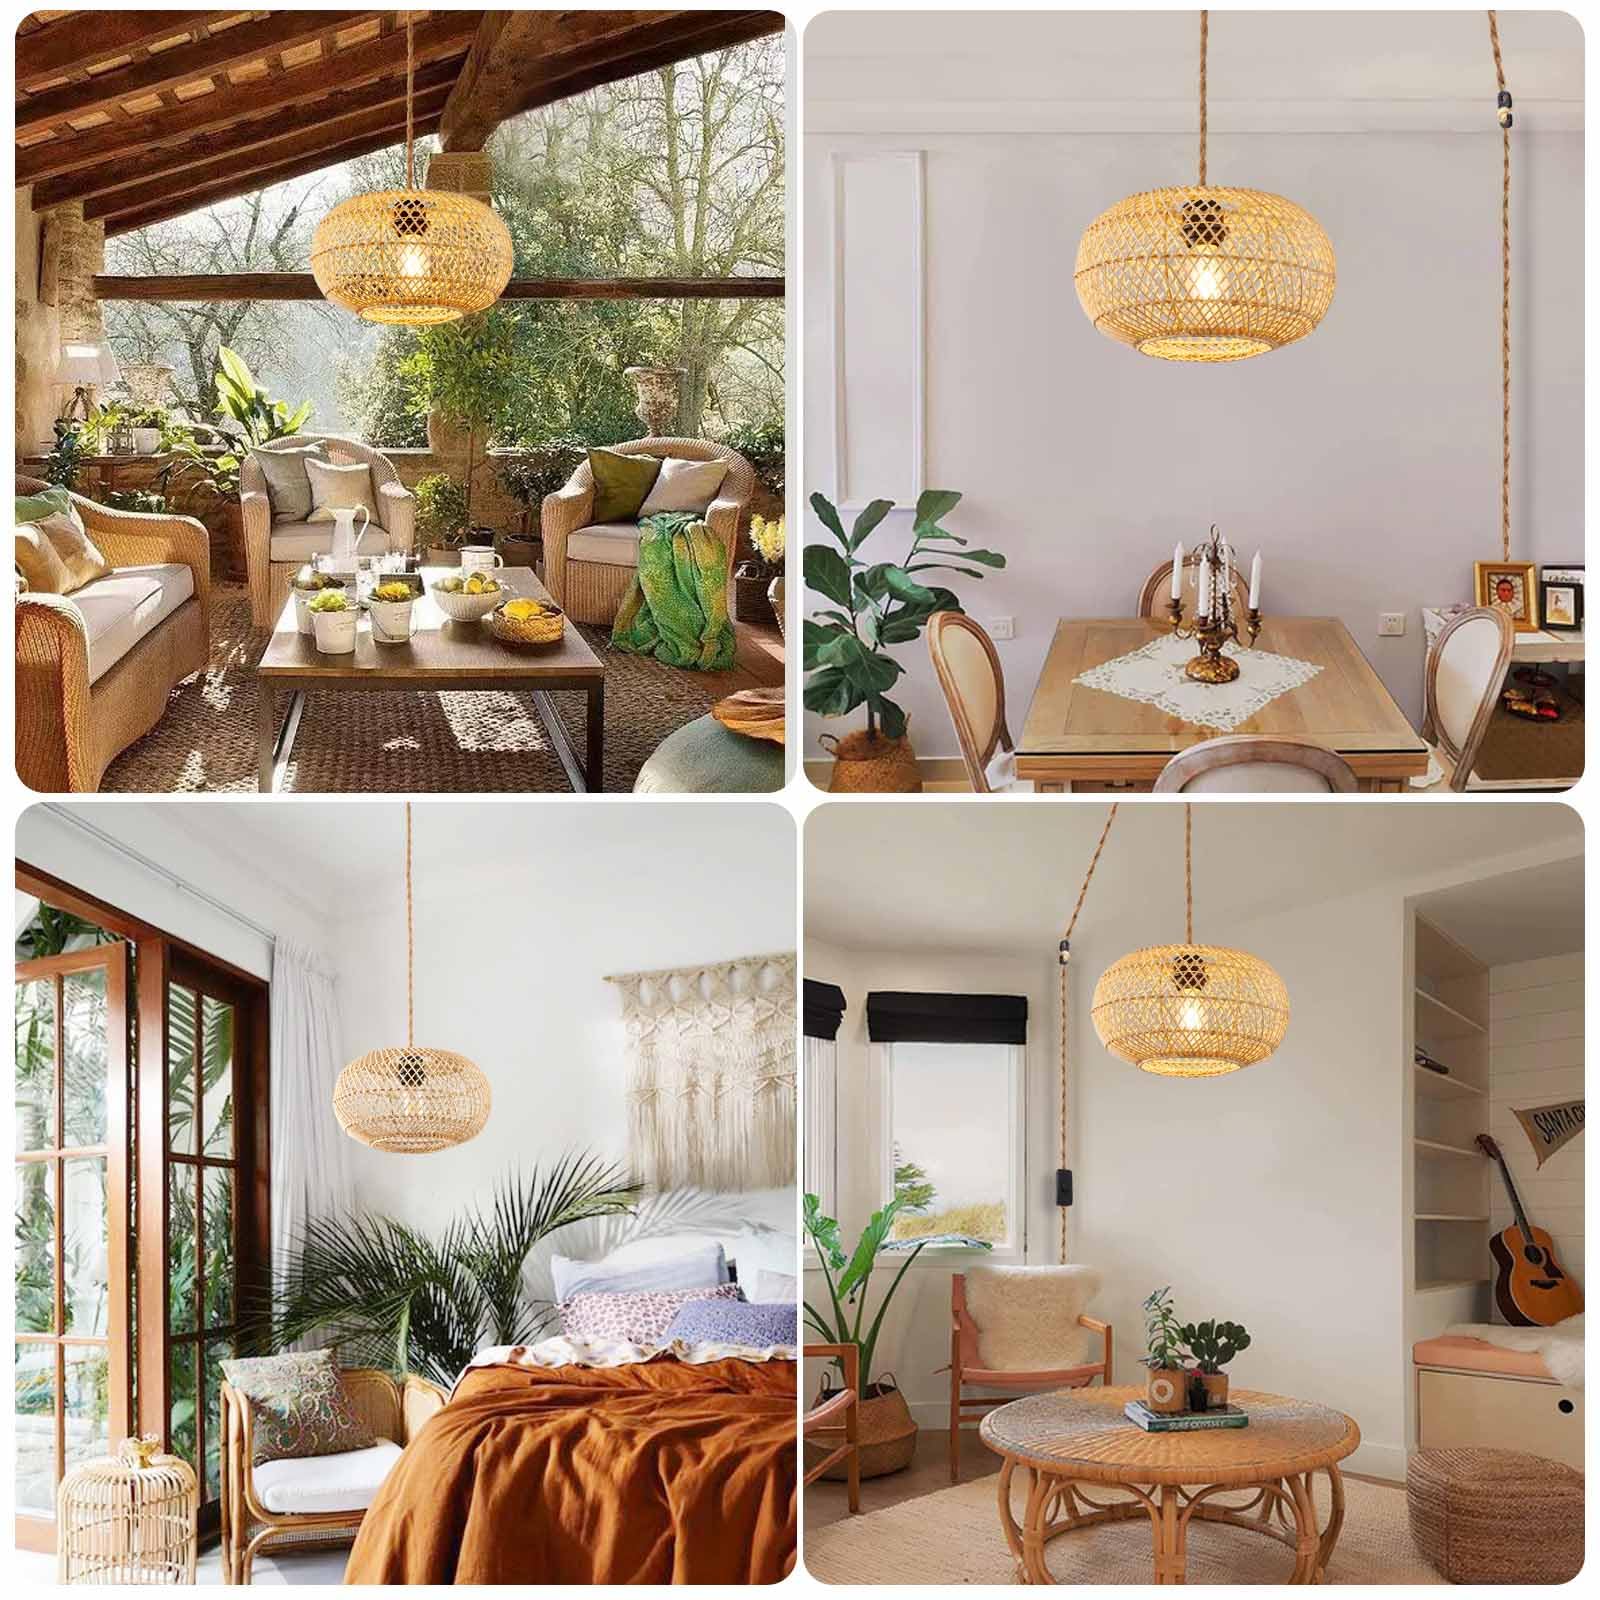 Plug in Pendant Light Rattan Hanging Lights with Plug in Cord, 15 FT Hemp Rope Cord Pendant Lamp Bamboo Lampshade, Farmhouse Industrial Boho Plug In Ceiling Light Fixture For Living Room Bedroom